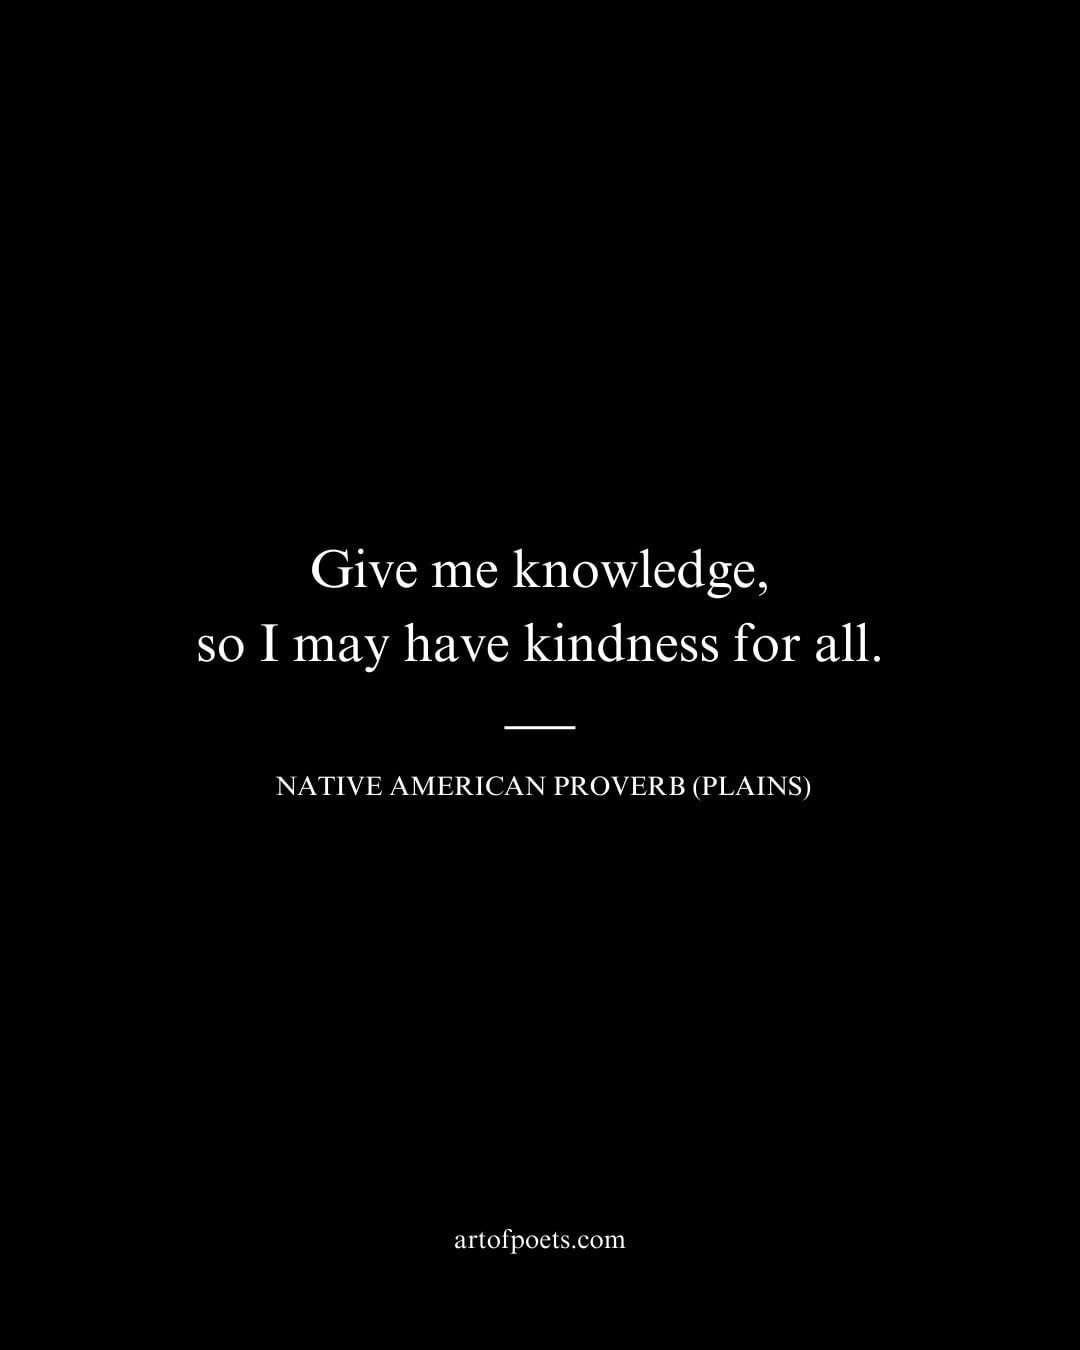 Give me knowledge so I may have kindness for all